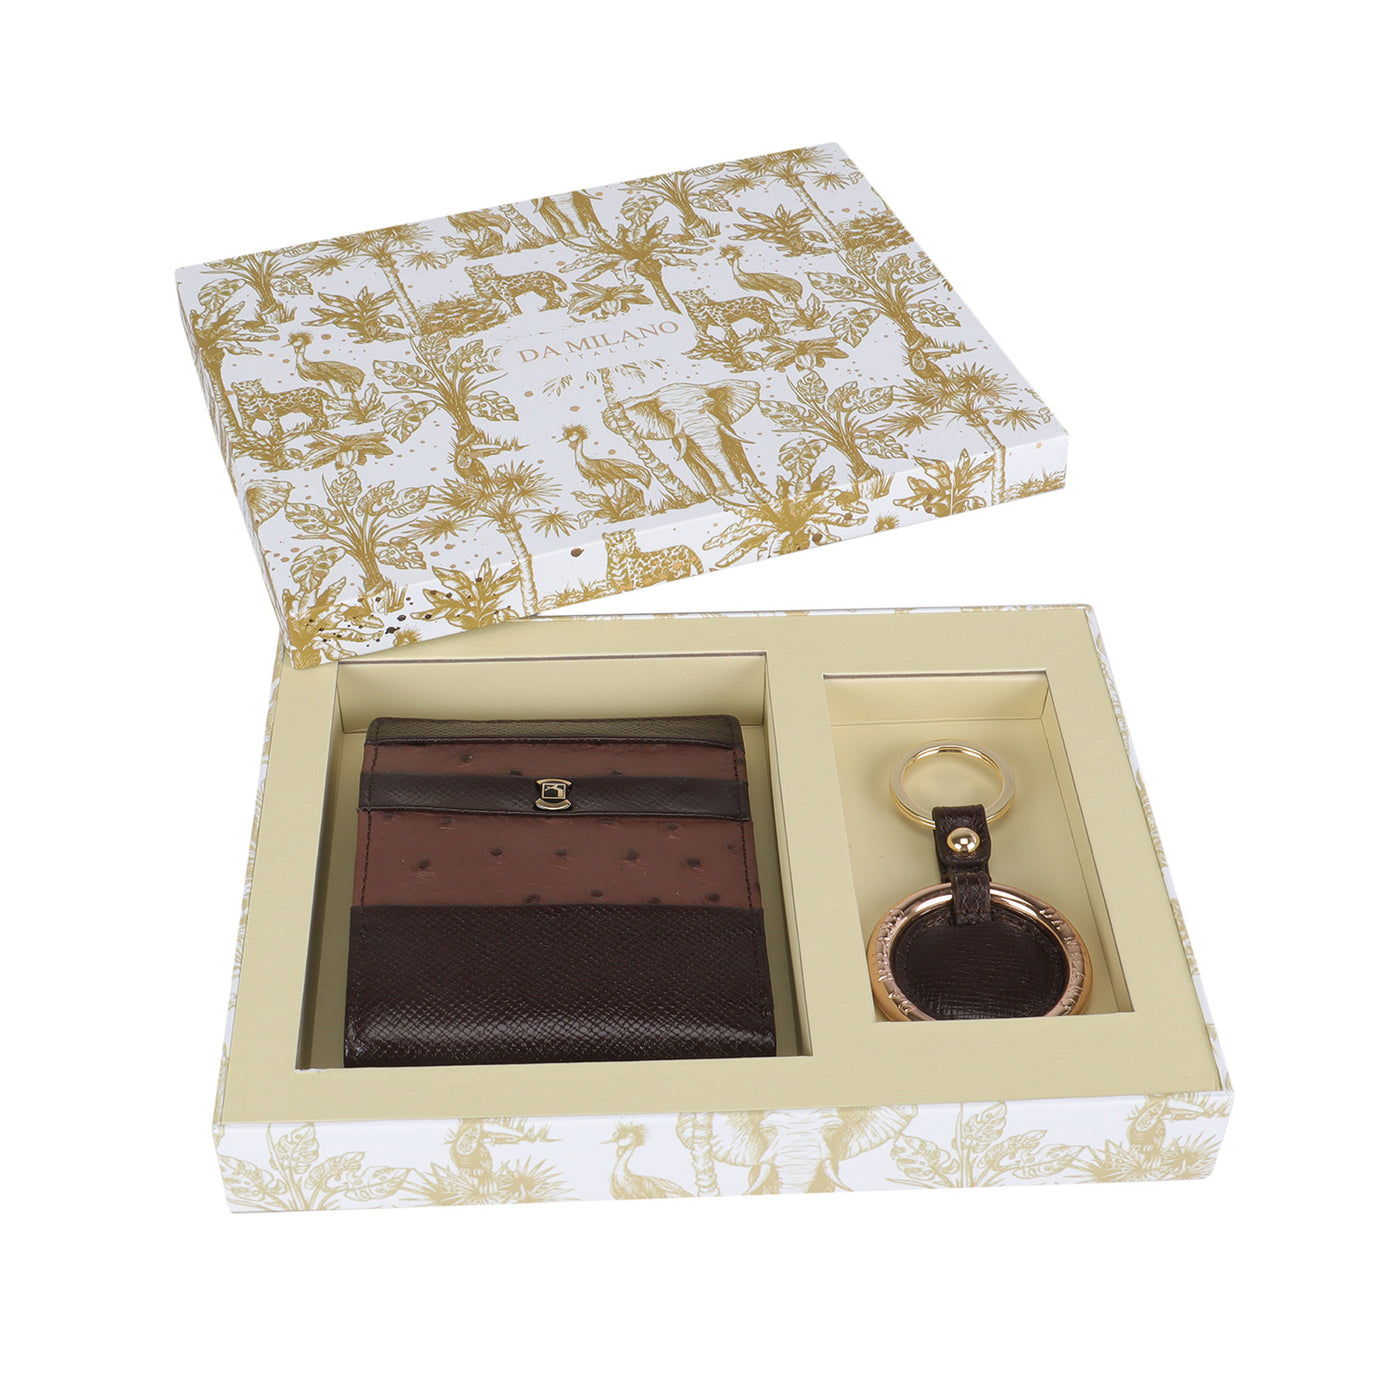 Chocolate Franzy Leather Mens Wallet & Keychain Gift Set